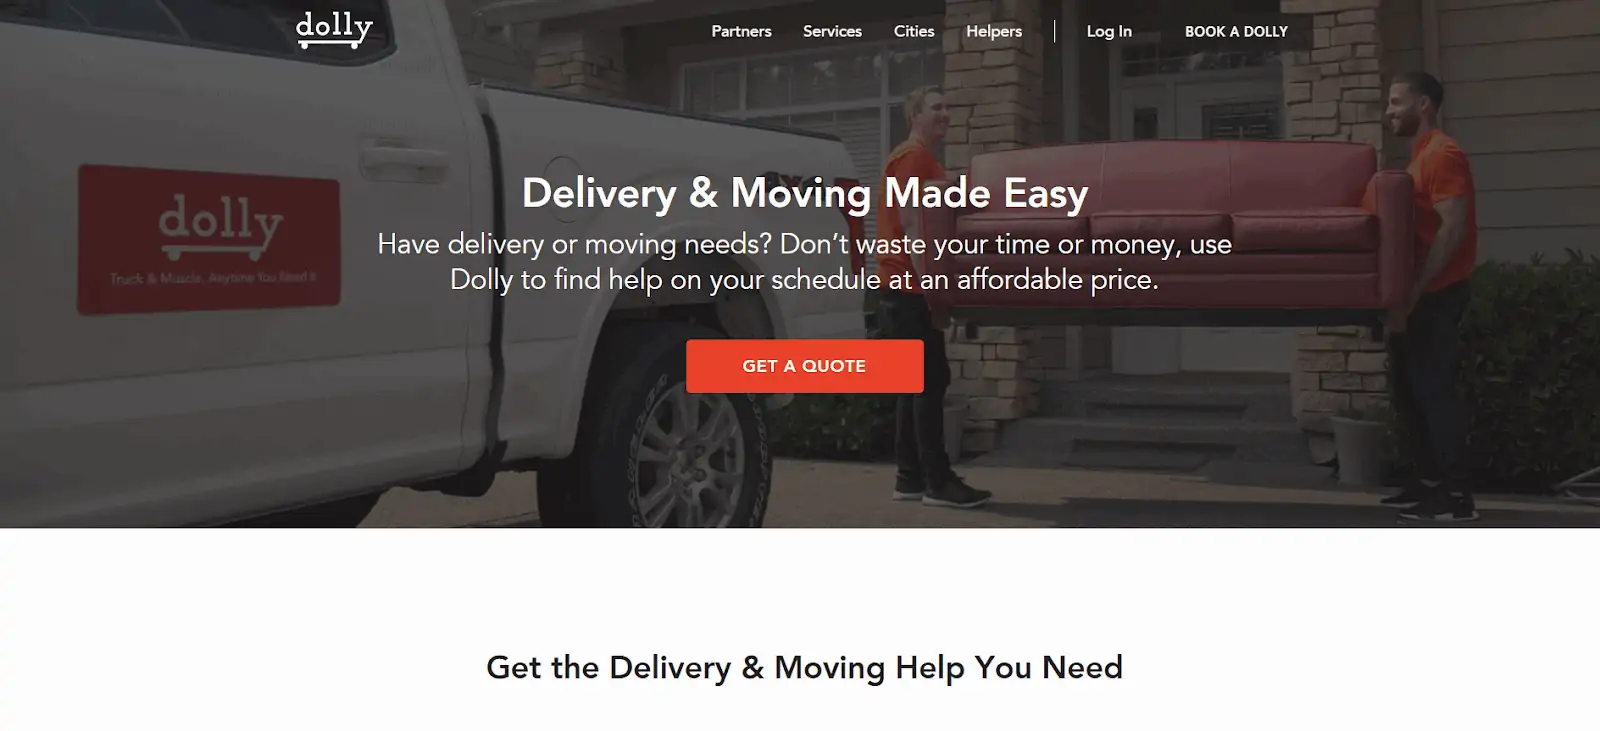 Uber for moving: Dolly homepage